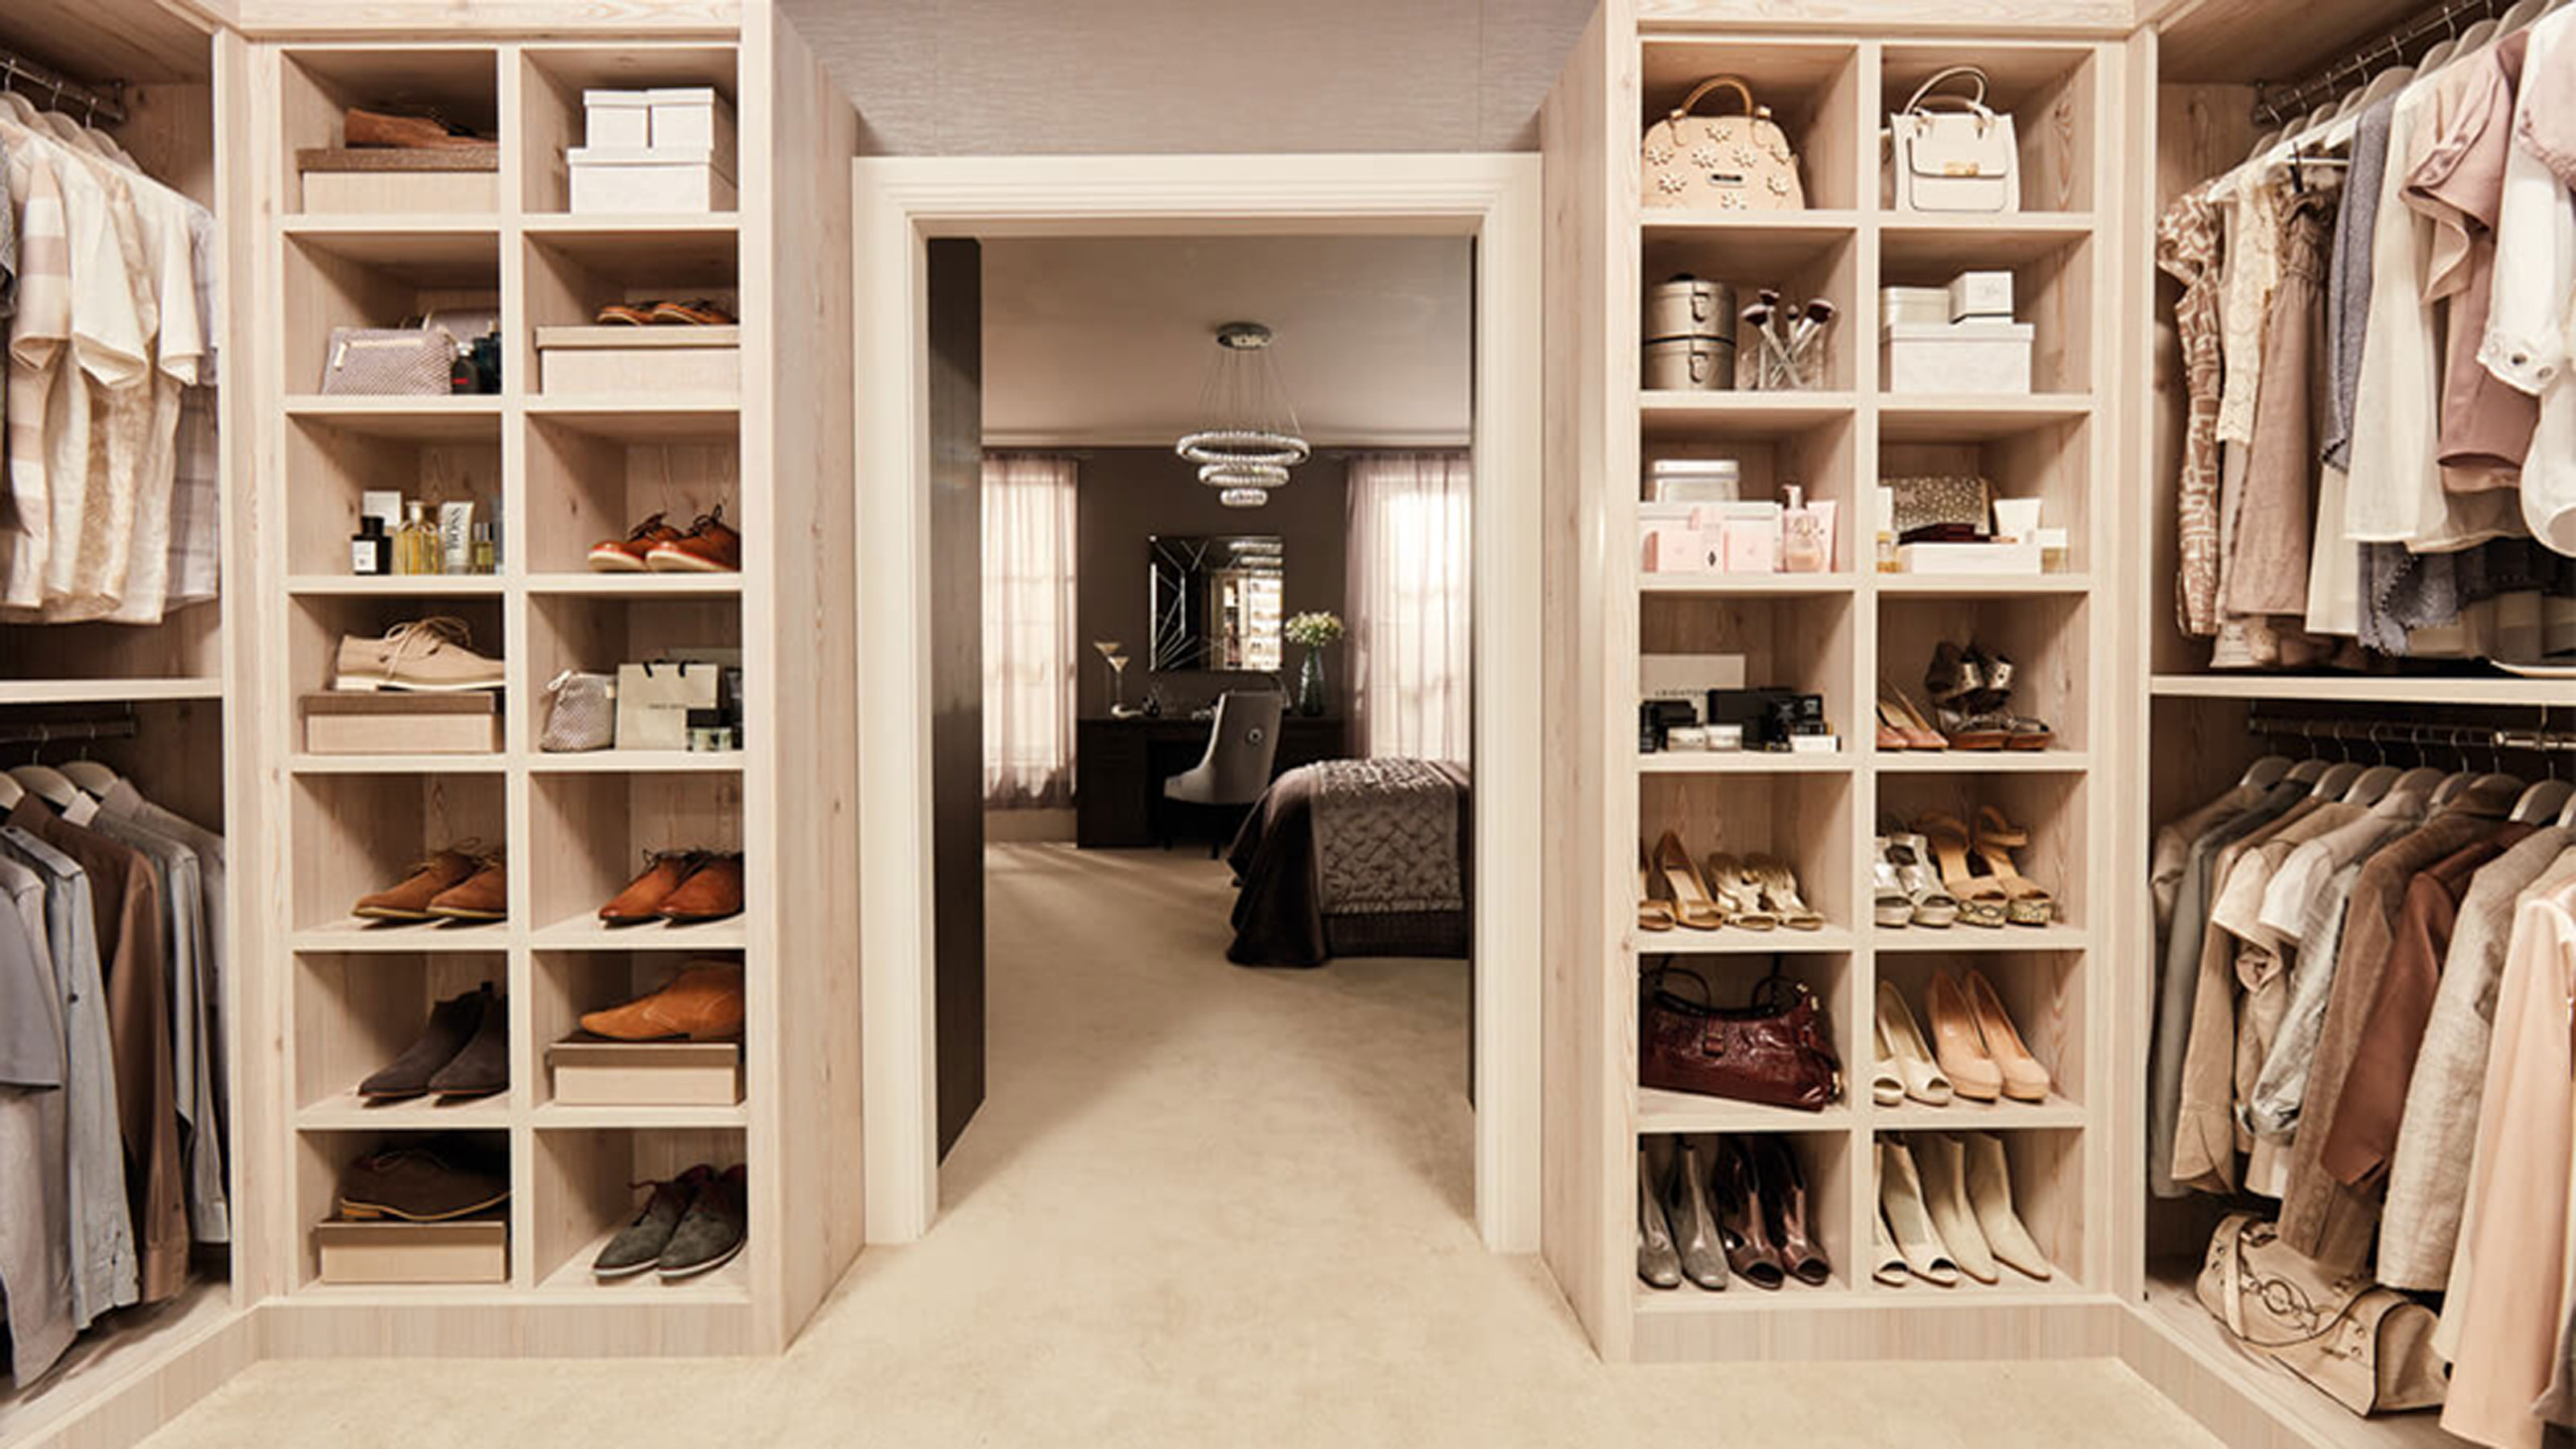 How Do You Lay Out A Walk-In Closet? Expert Organizers Advise |